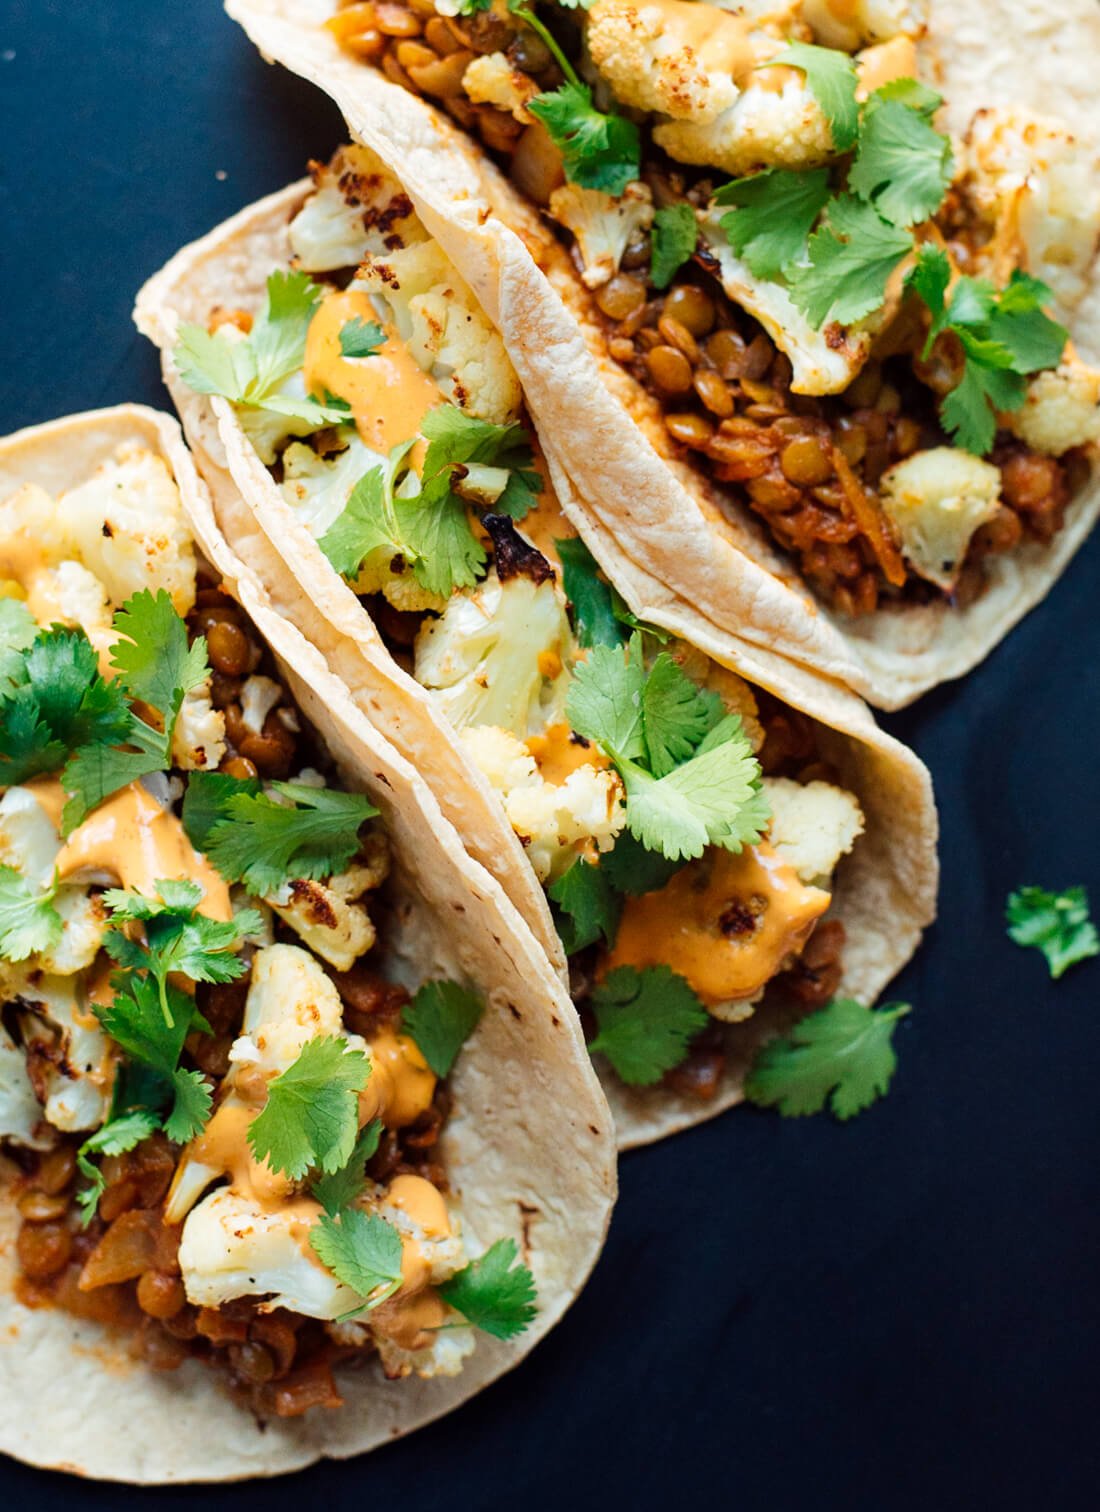 Tacos with roasted cauliflower, seasoned lentils and creamy chipotle sauce